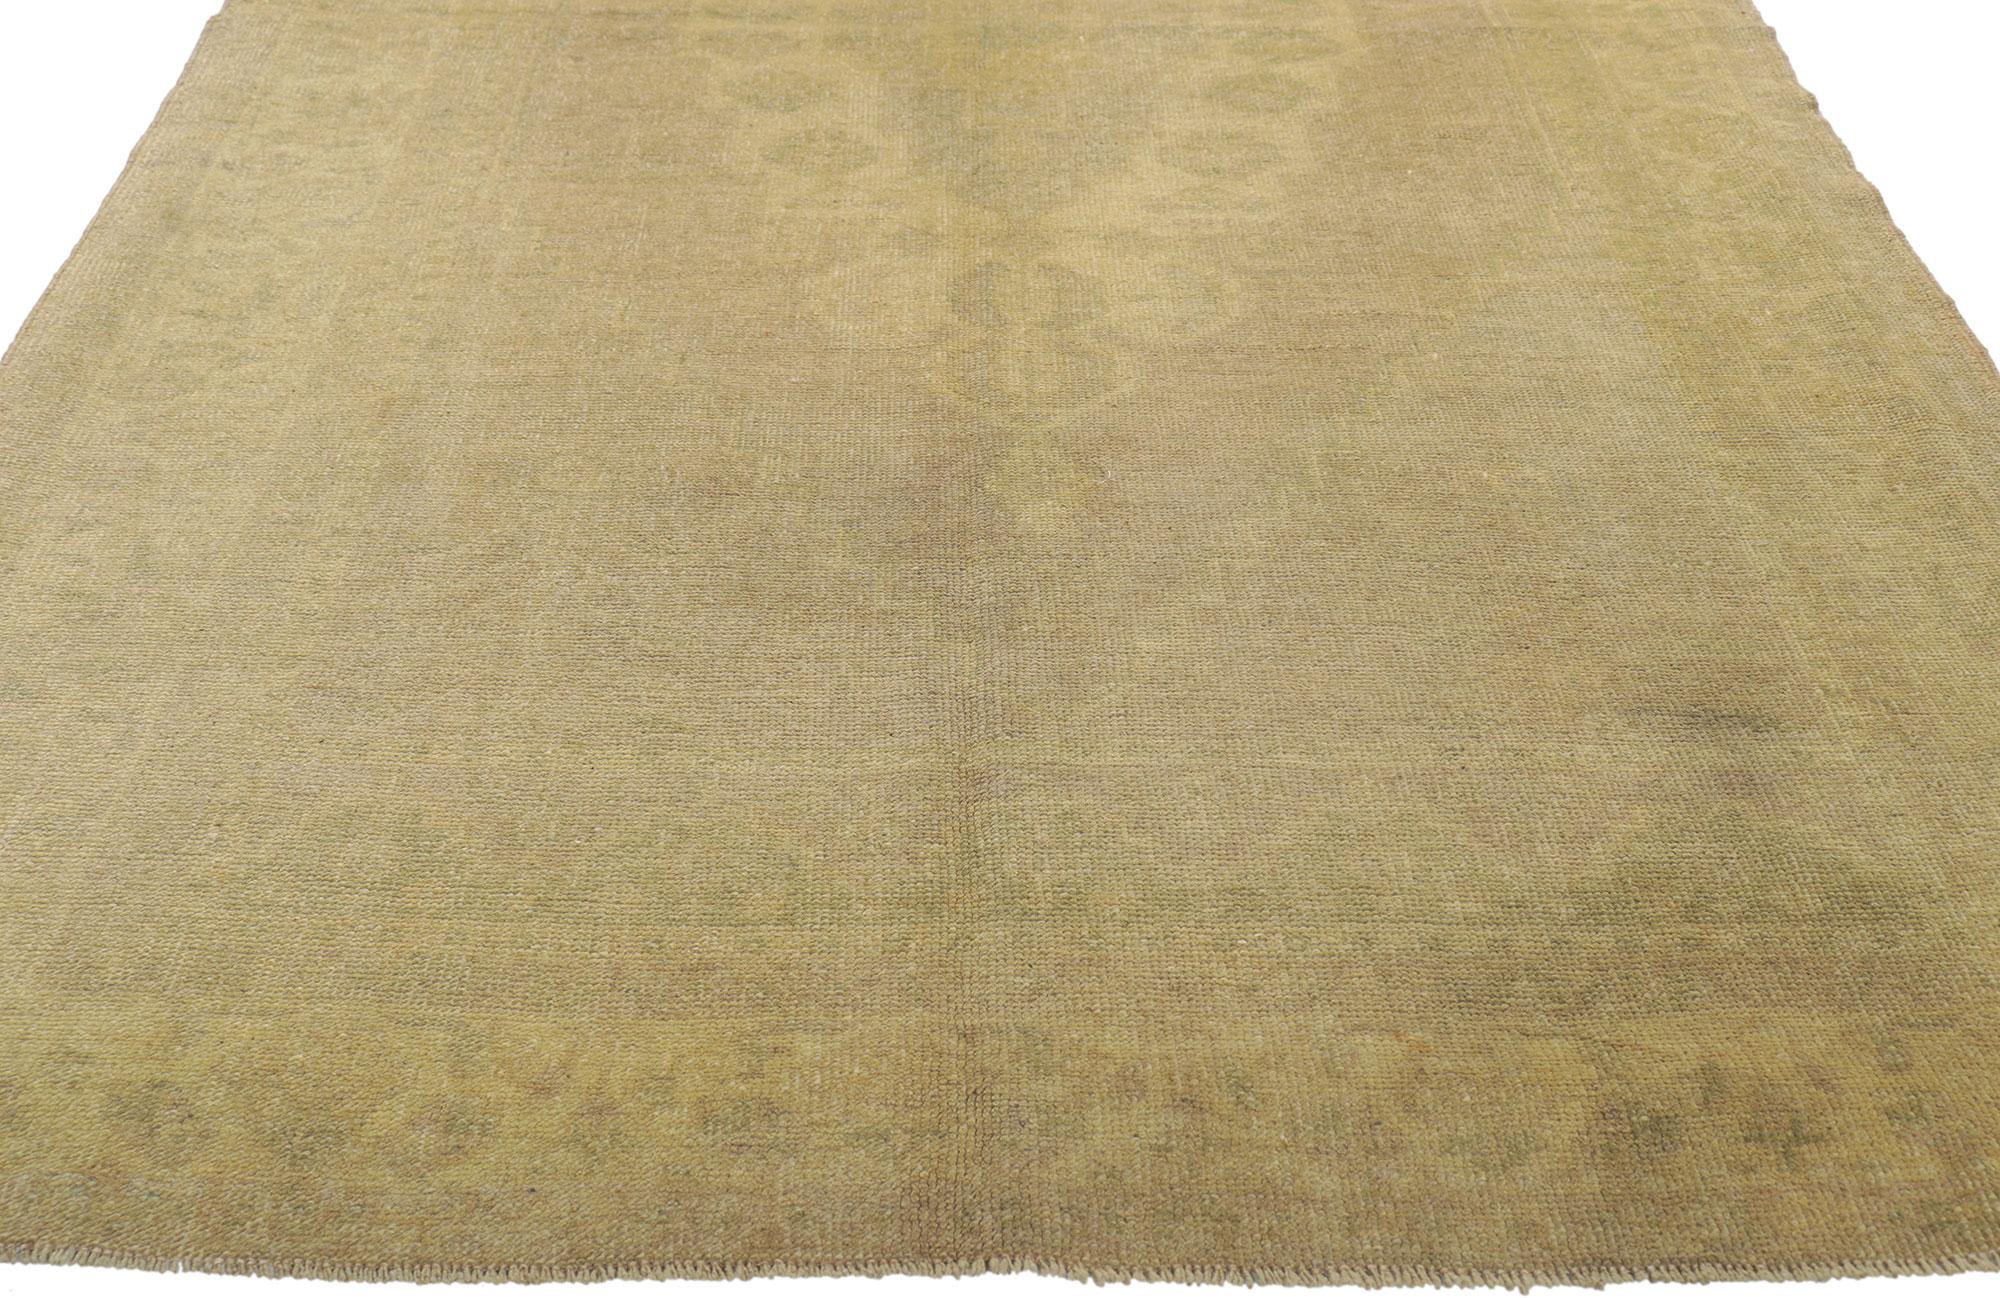 Neutral Vintage Turkish Oushak Rug with Muted Earth-Tone Colors In Good Condition For Sale In Dallas, TX